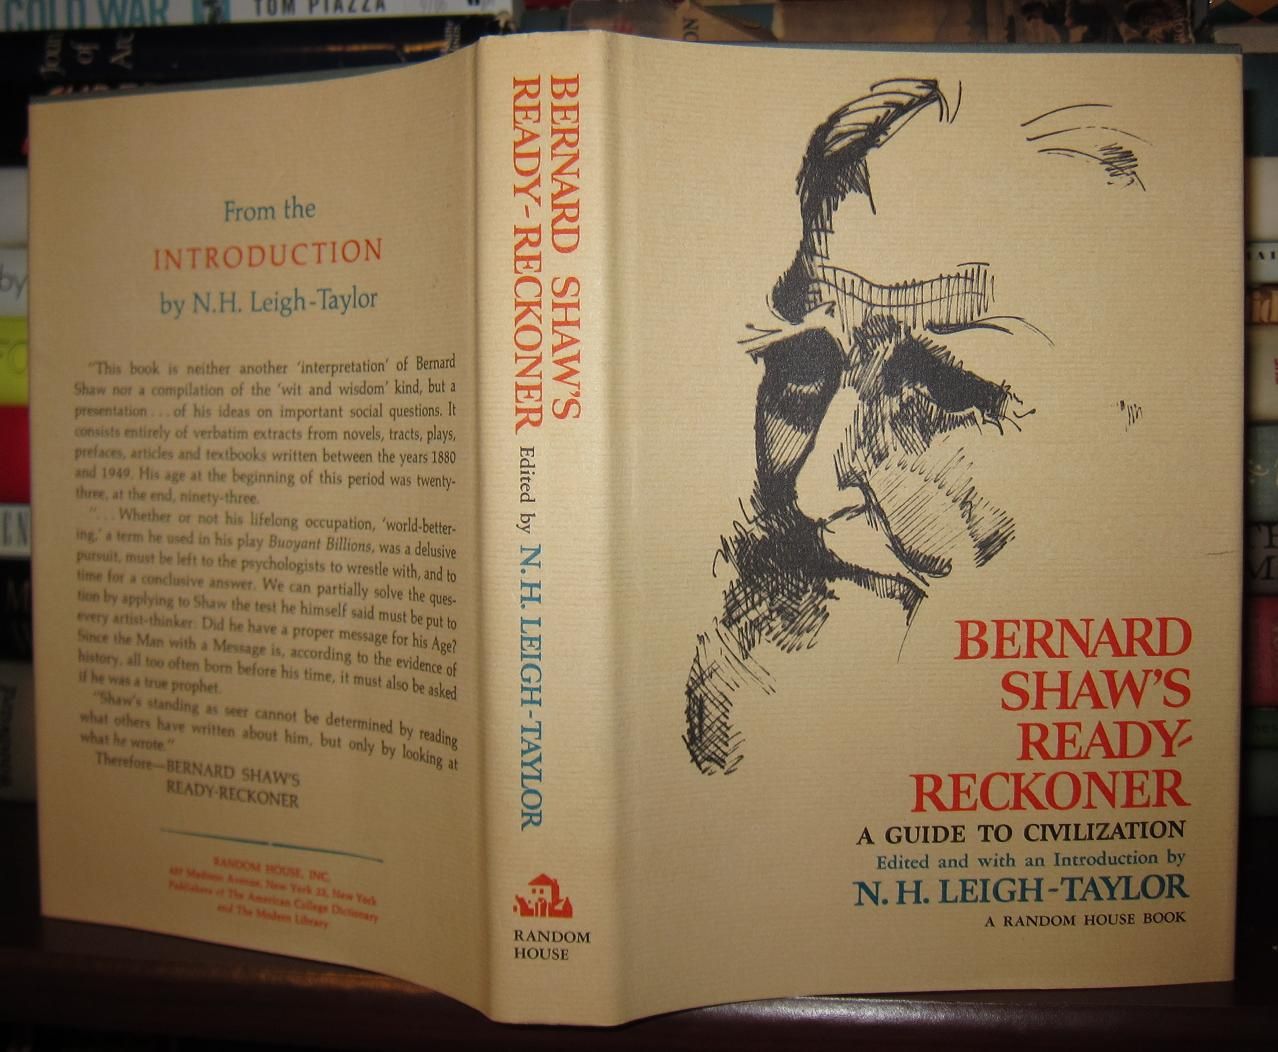 LEIGH-TAYLOR, N. H. - Bernard Shaw's Ready Reckoner a Guide to Civilization